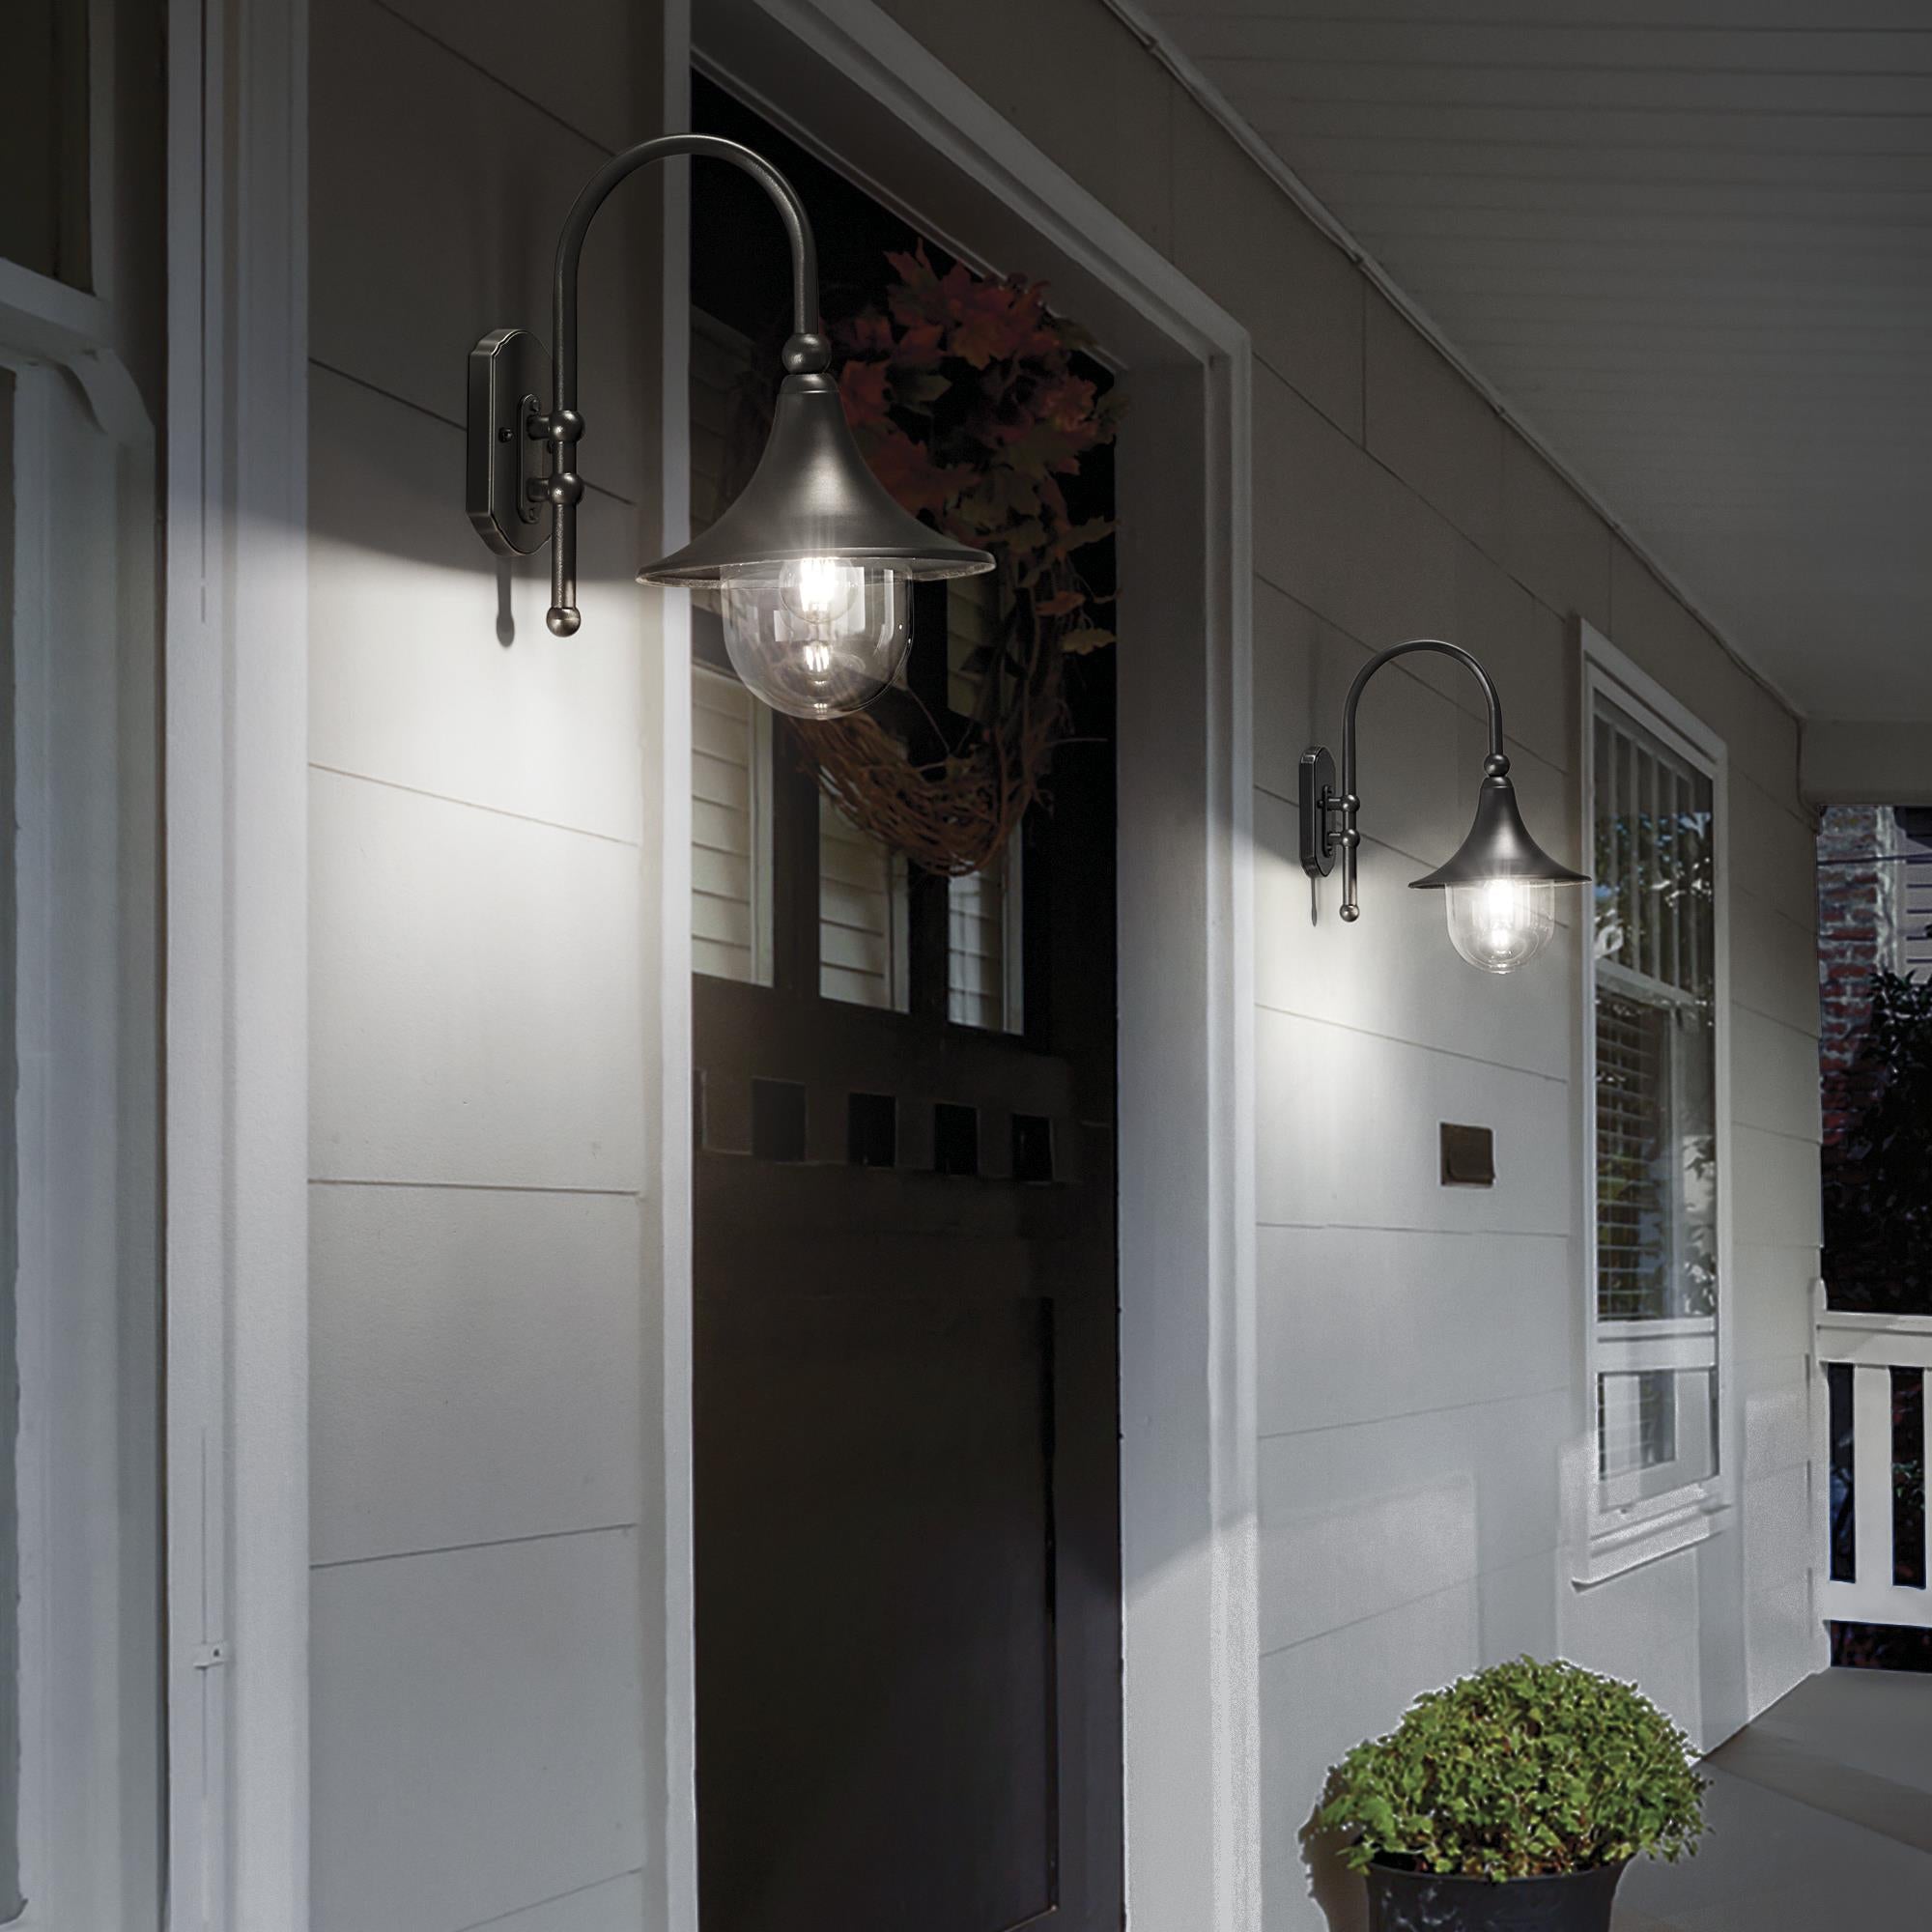 Ideal Lux 246819,Category_Wall Lights,OUTDOOR,Finish_ CIMA AP1 ANTRACITE